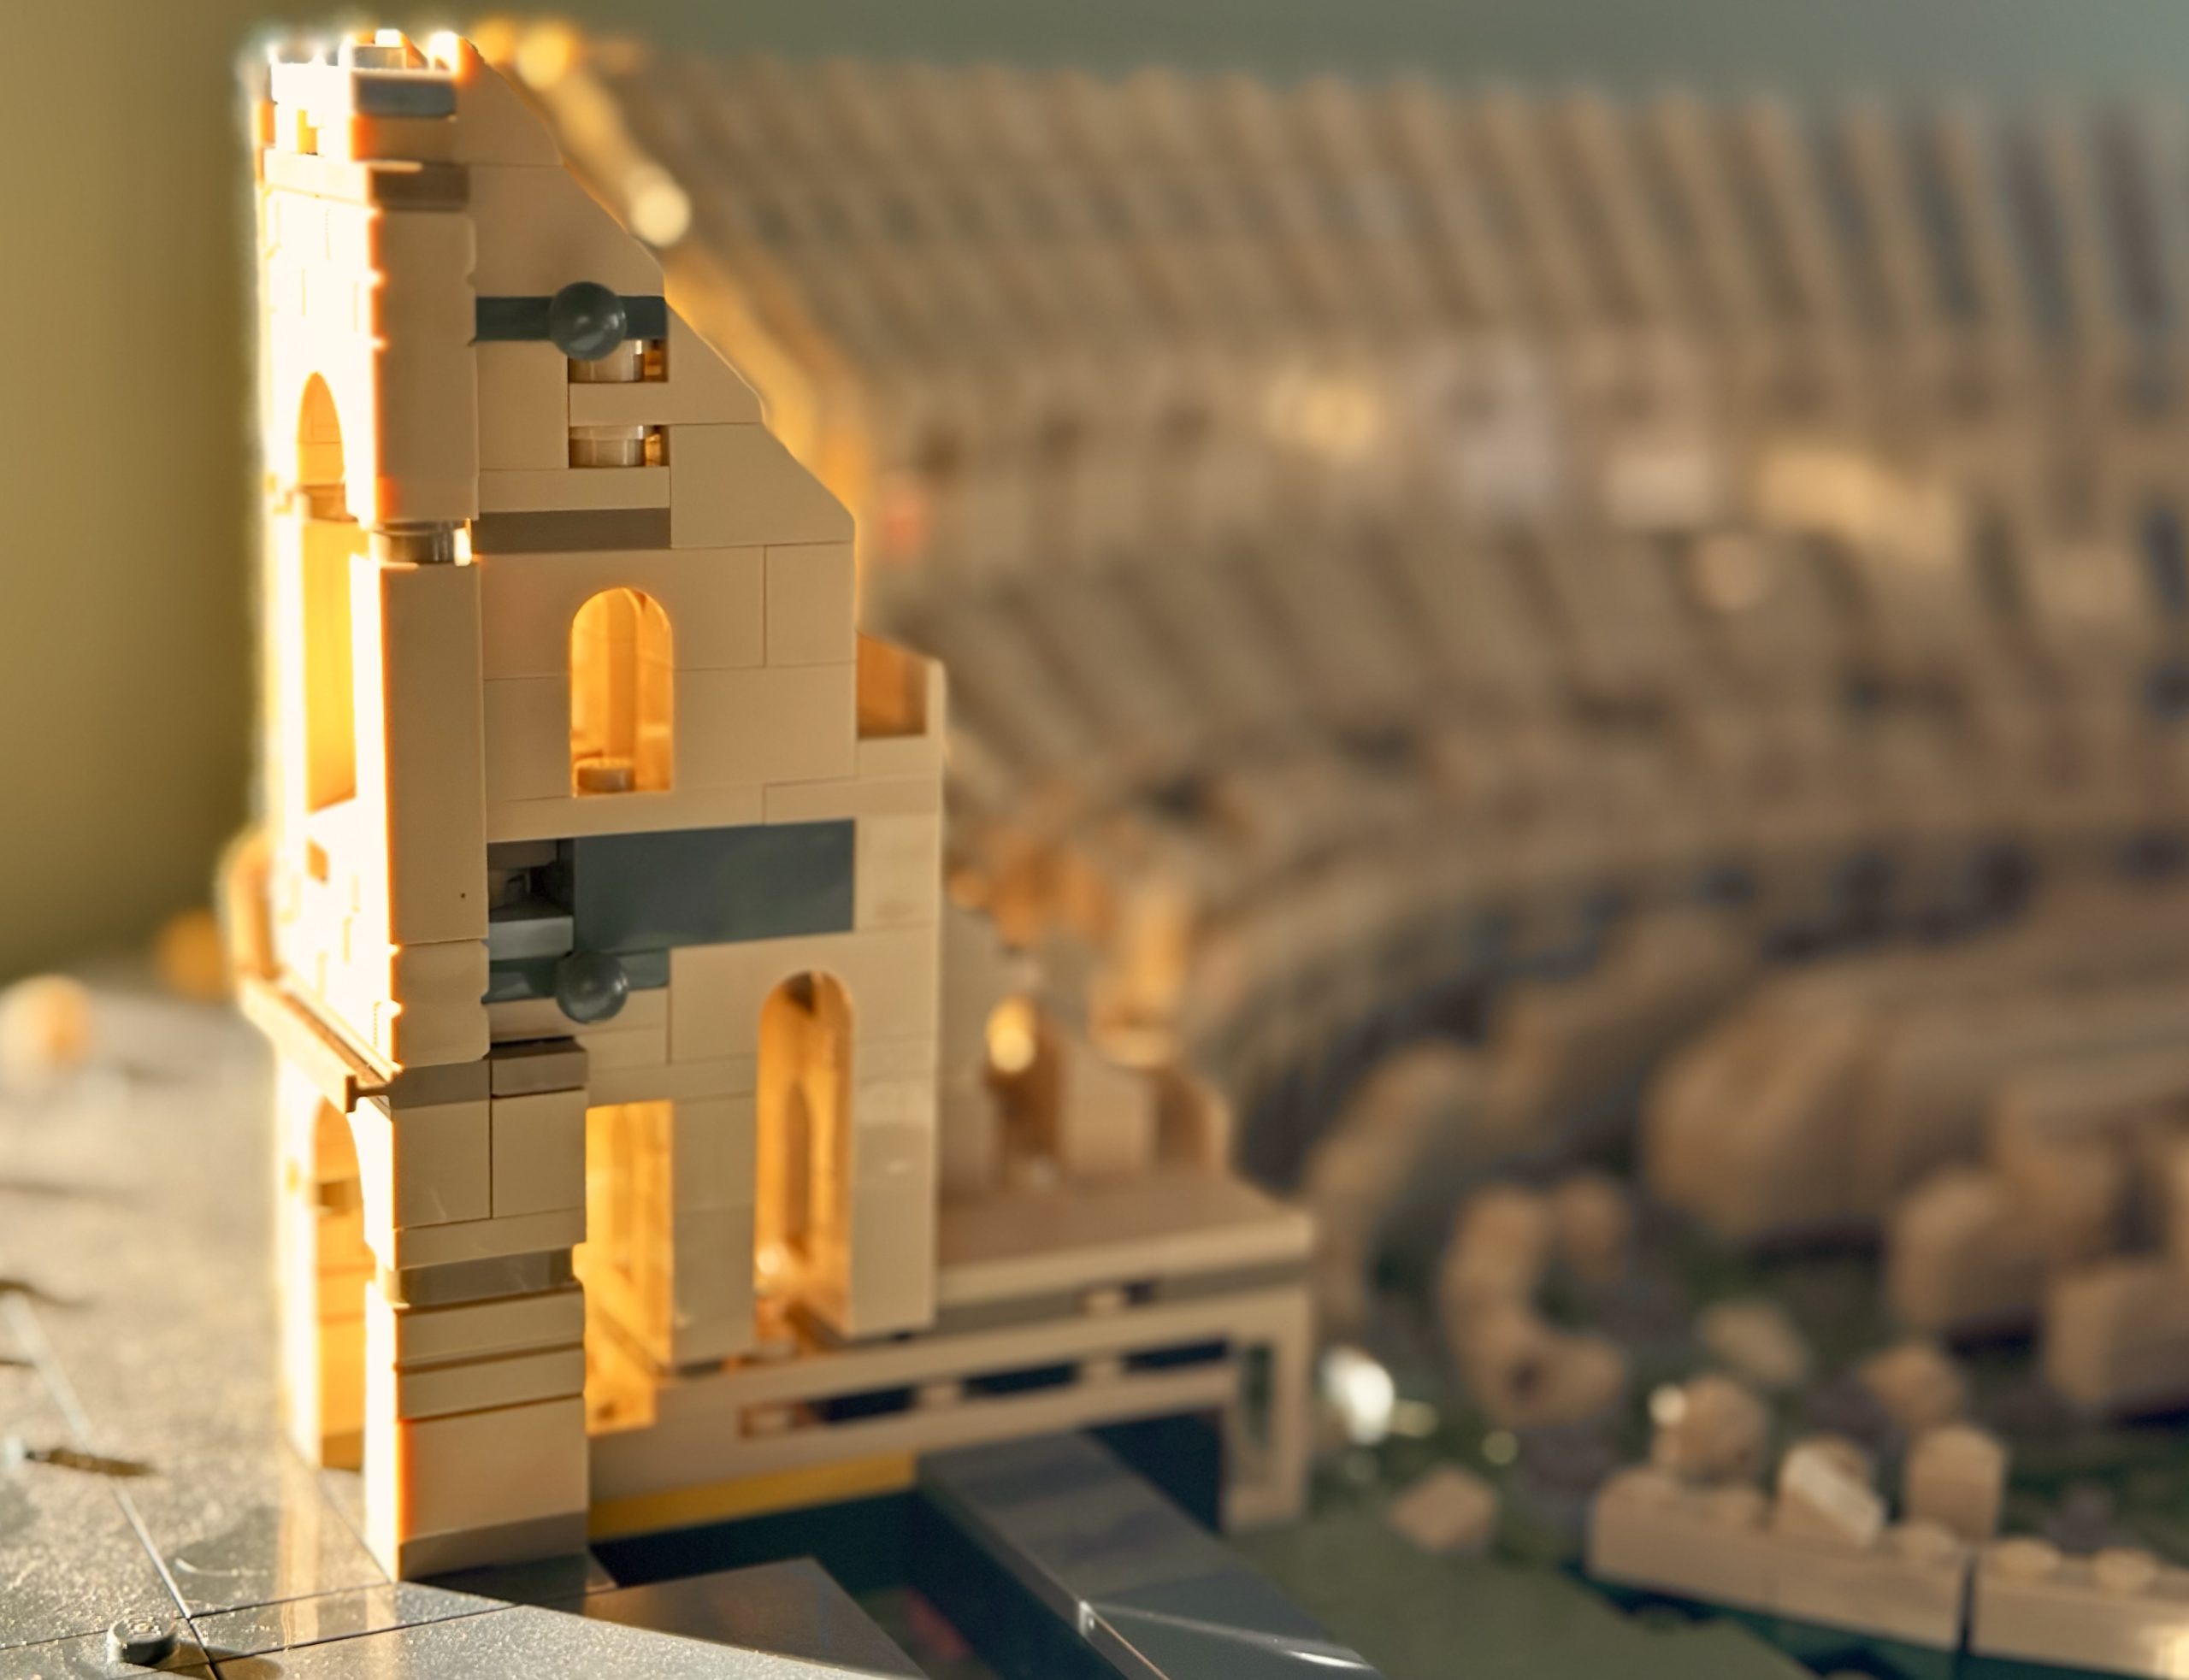 Golden hour sunlight hitting an unfinished LEGO model of the Colosseum.